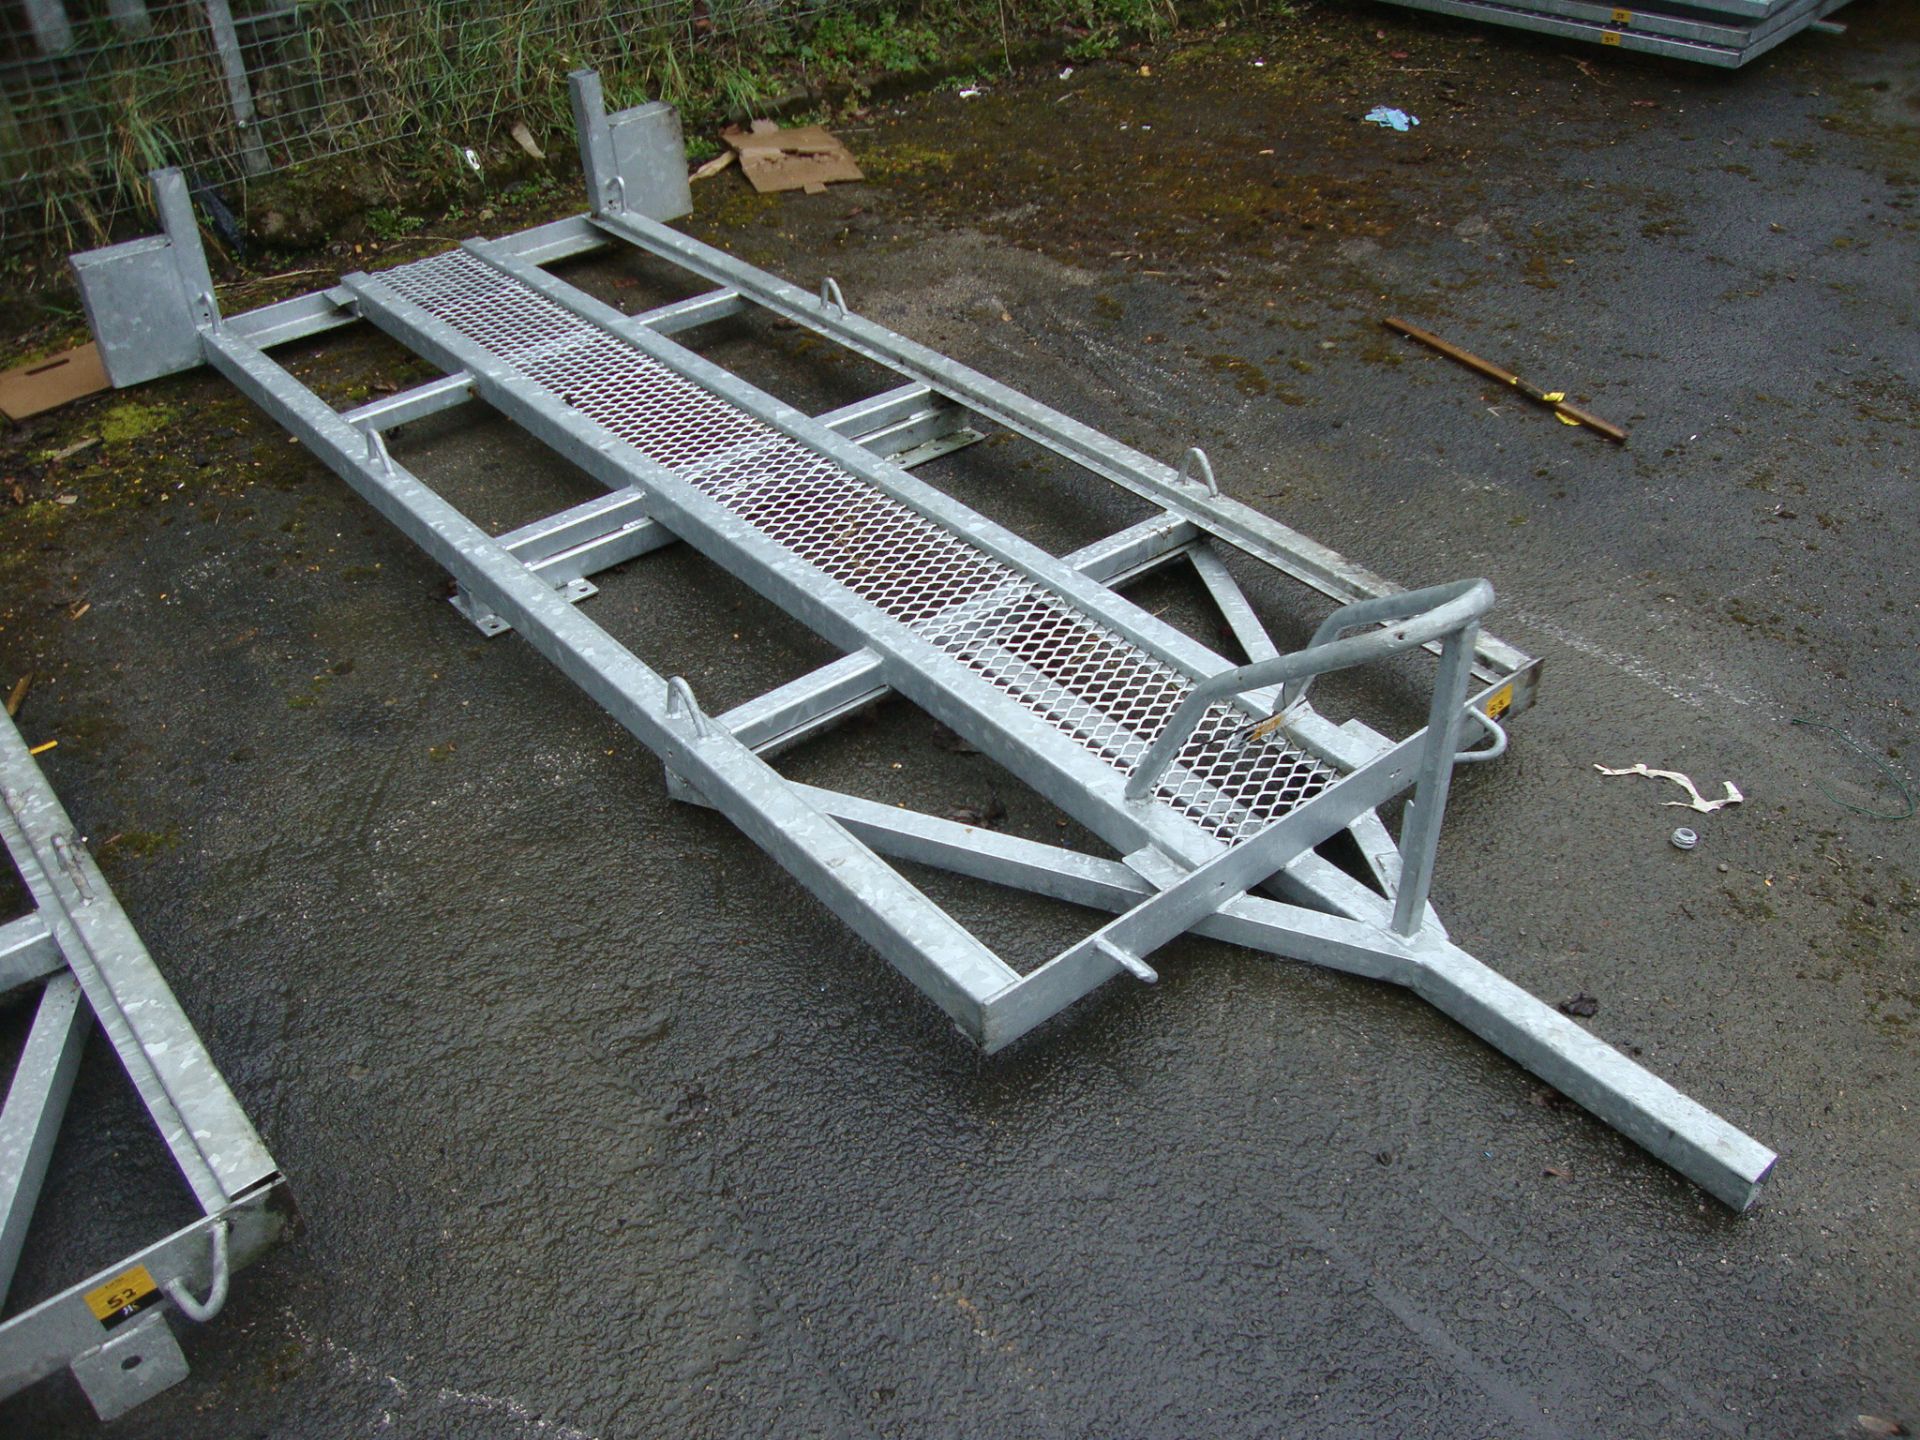 Small trailer chassis/bed, possibly for use with motorbikes, main bed dimensions being 231cm (l) x